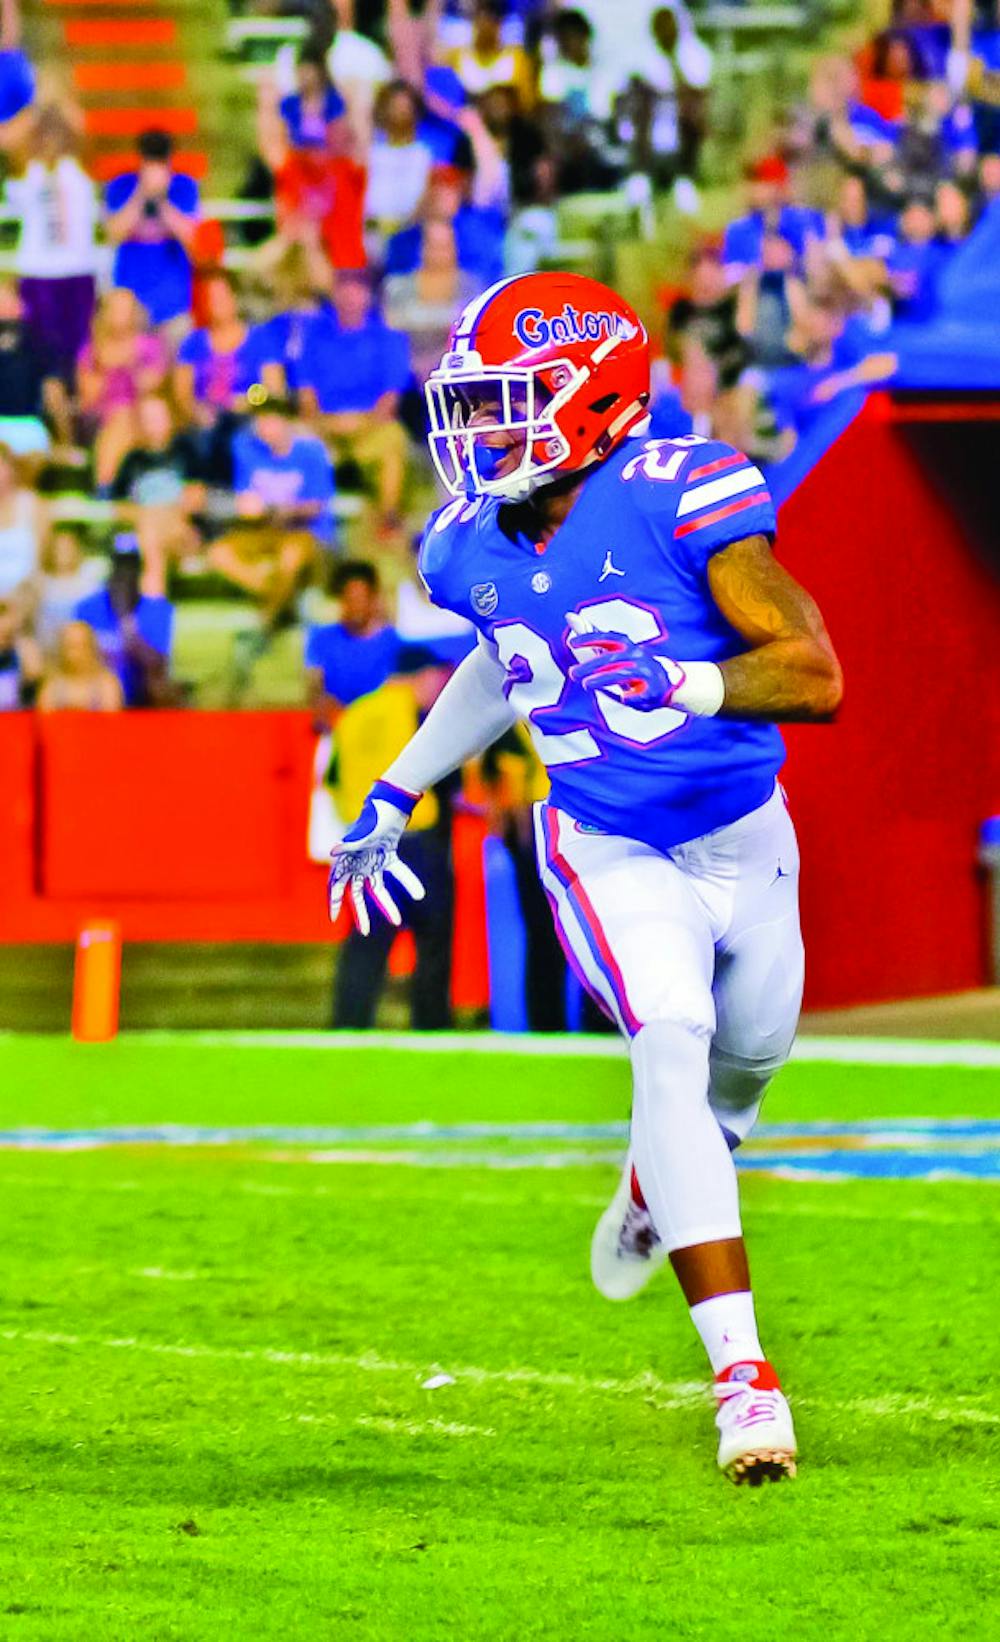 <p><span id="docs-internal-guid-46fd2f11-7fff-21fc-447a-4a608512354c"><span>UF defensive back John Huggins did not play in five games last year after he was accused of choking a tutor. Huggins has been absent from fall camp as well.</span></span></p>